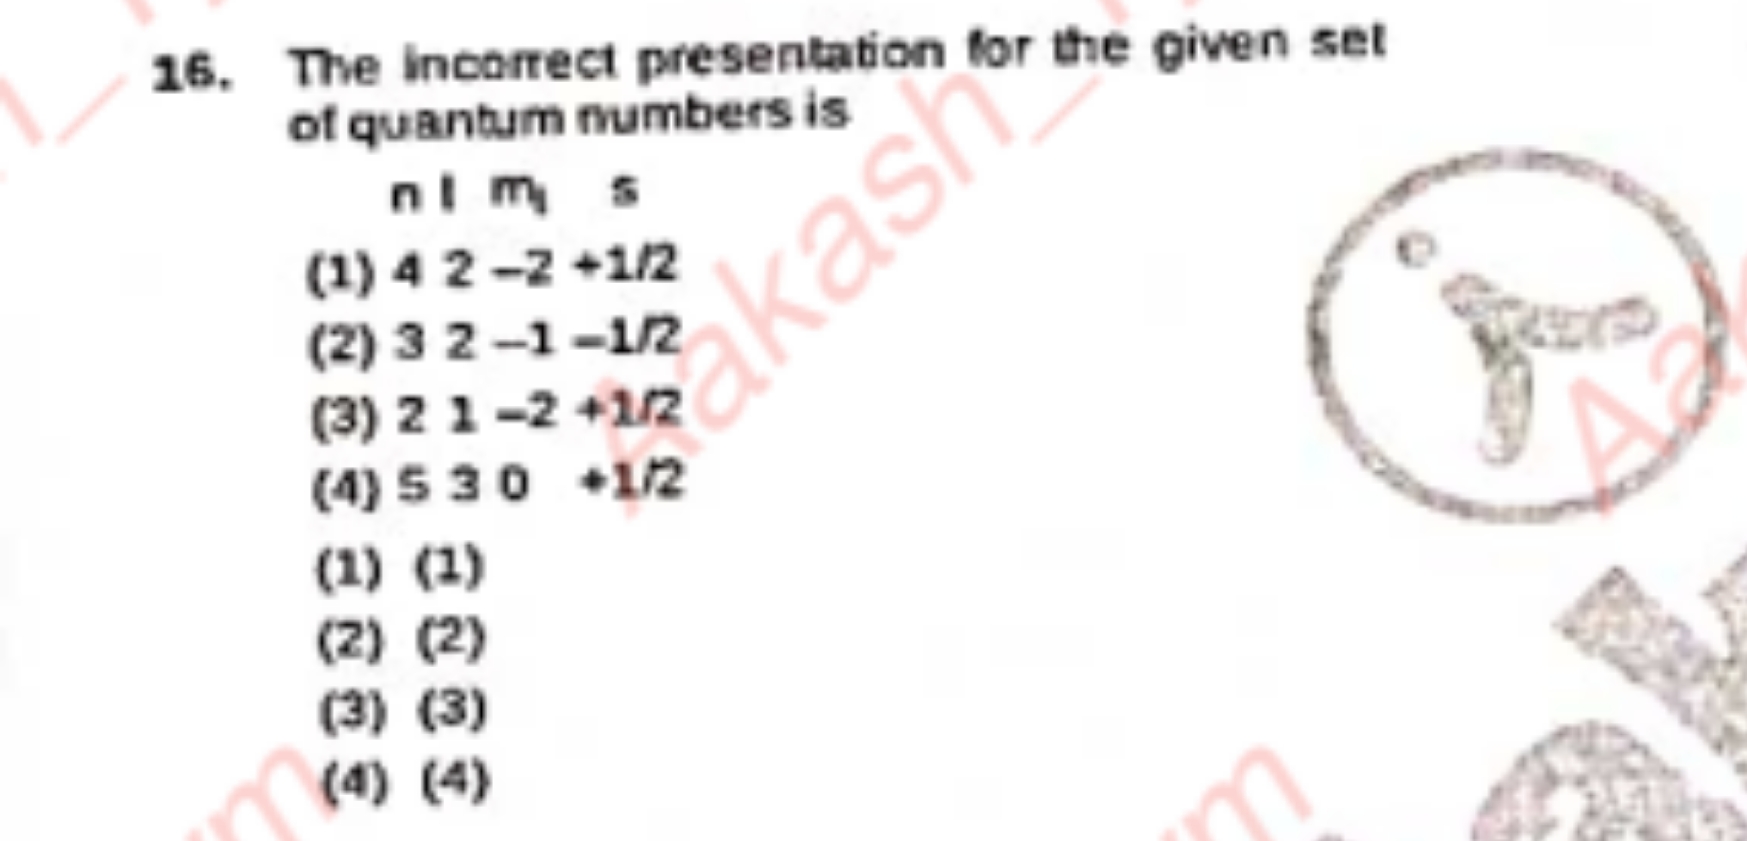 The incorrect presentation for the given set of quantum numbers is n!m